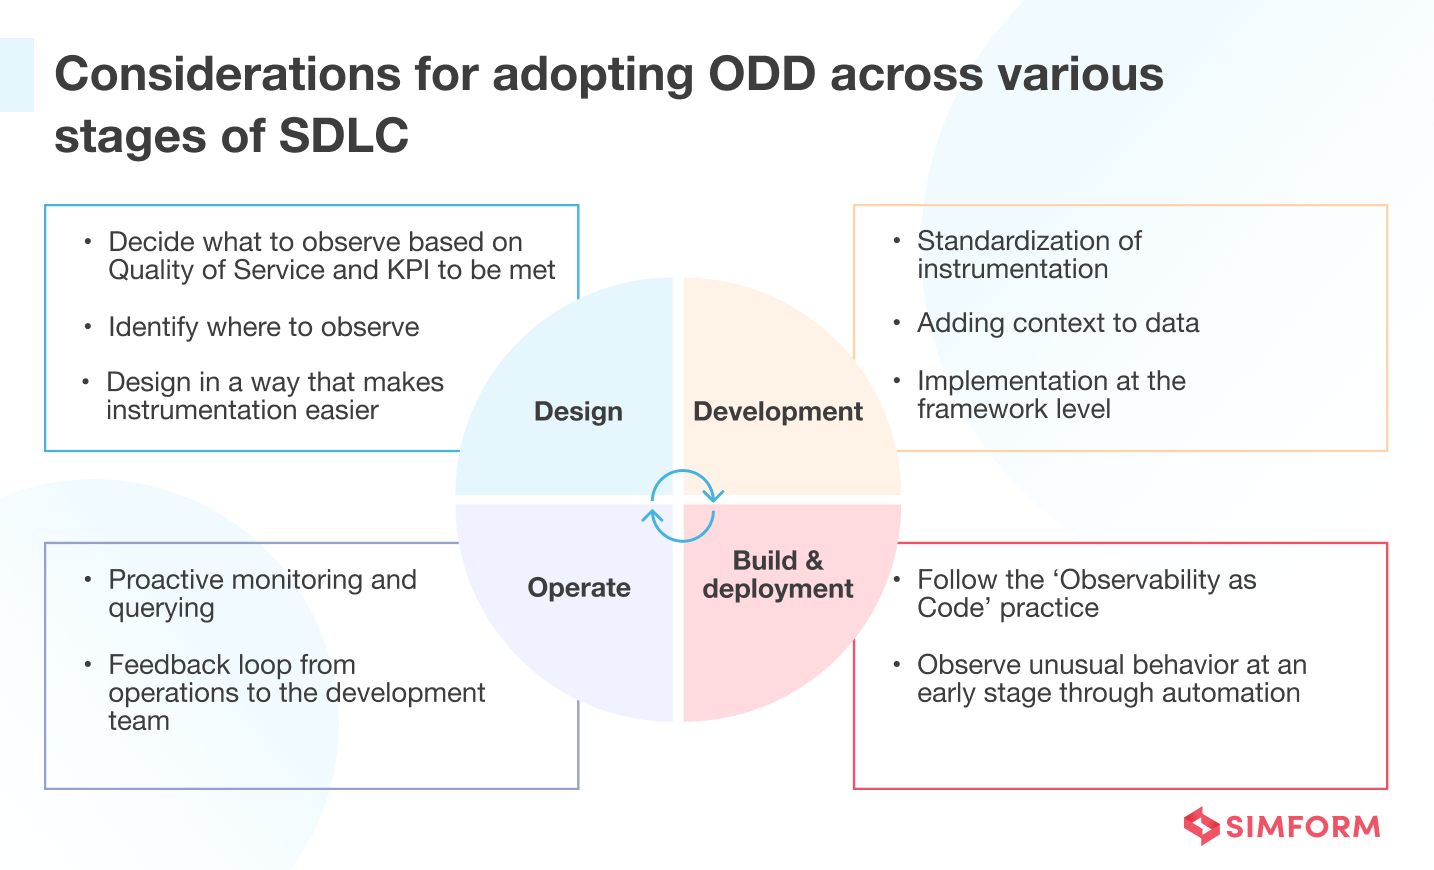 Considerations for Adopting ODD at Various Stages of SDLC